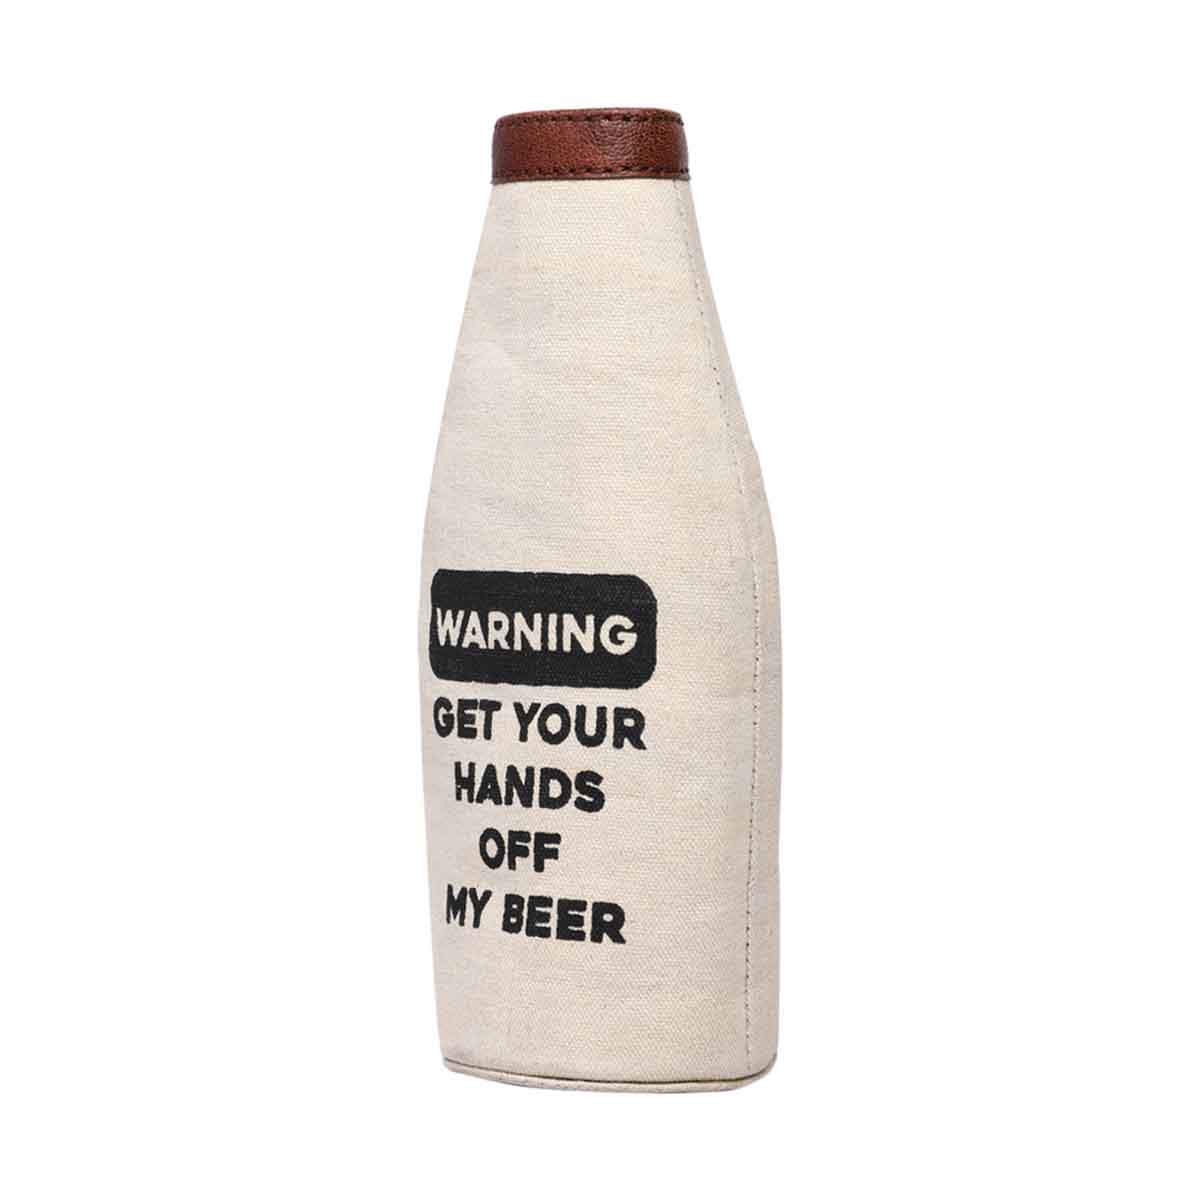 Mona B Pint Beer Bottle Covers with Stylish Printing for Men and Women (Warning)